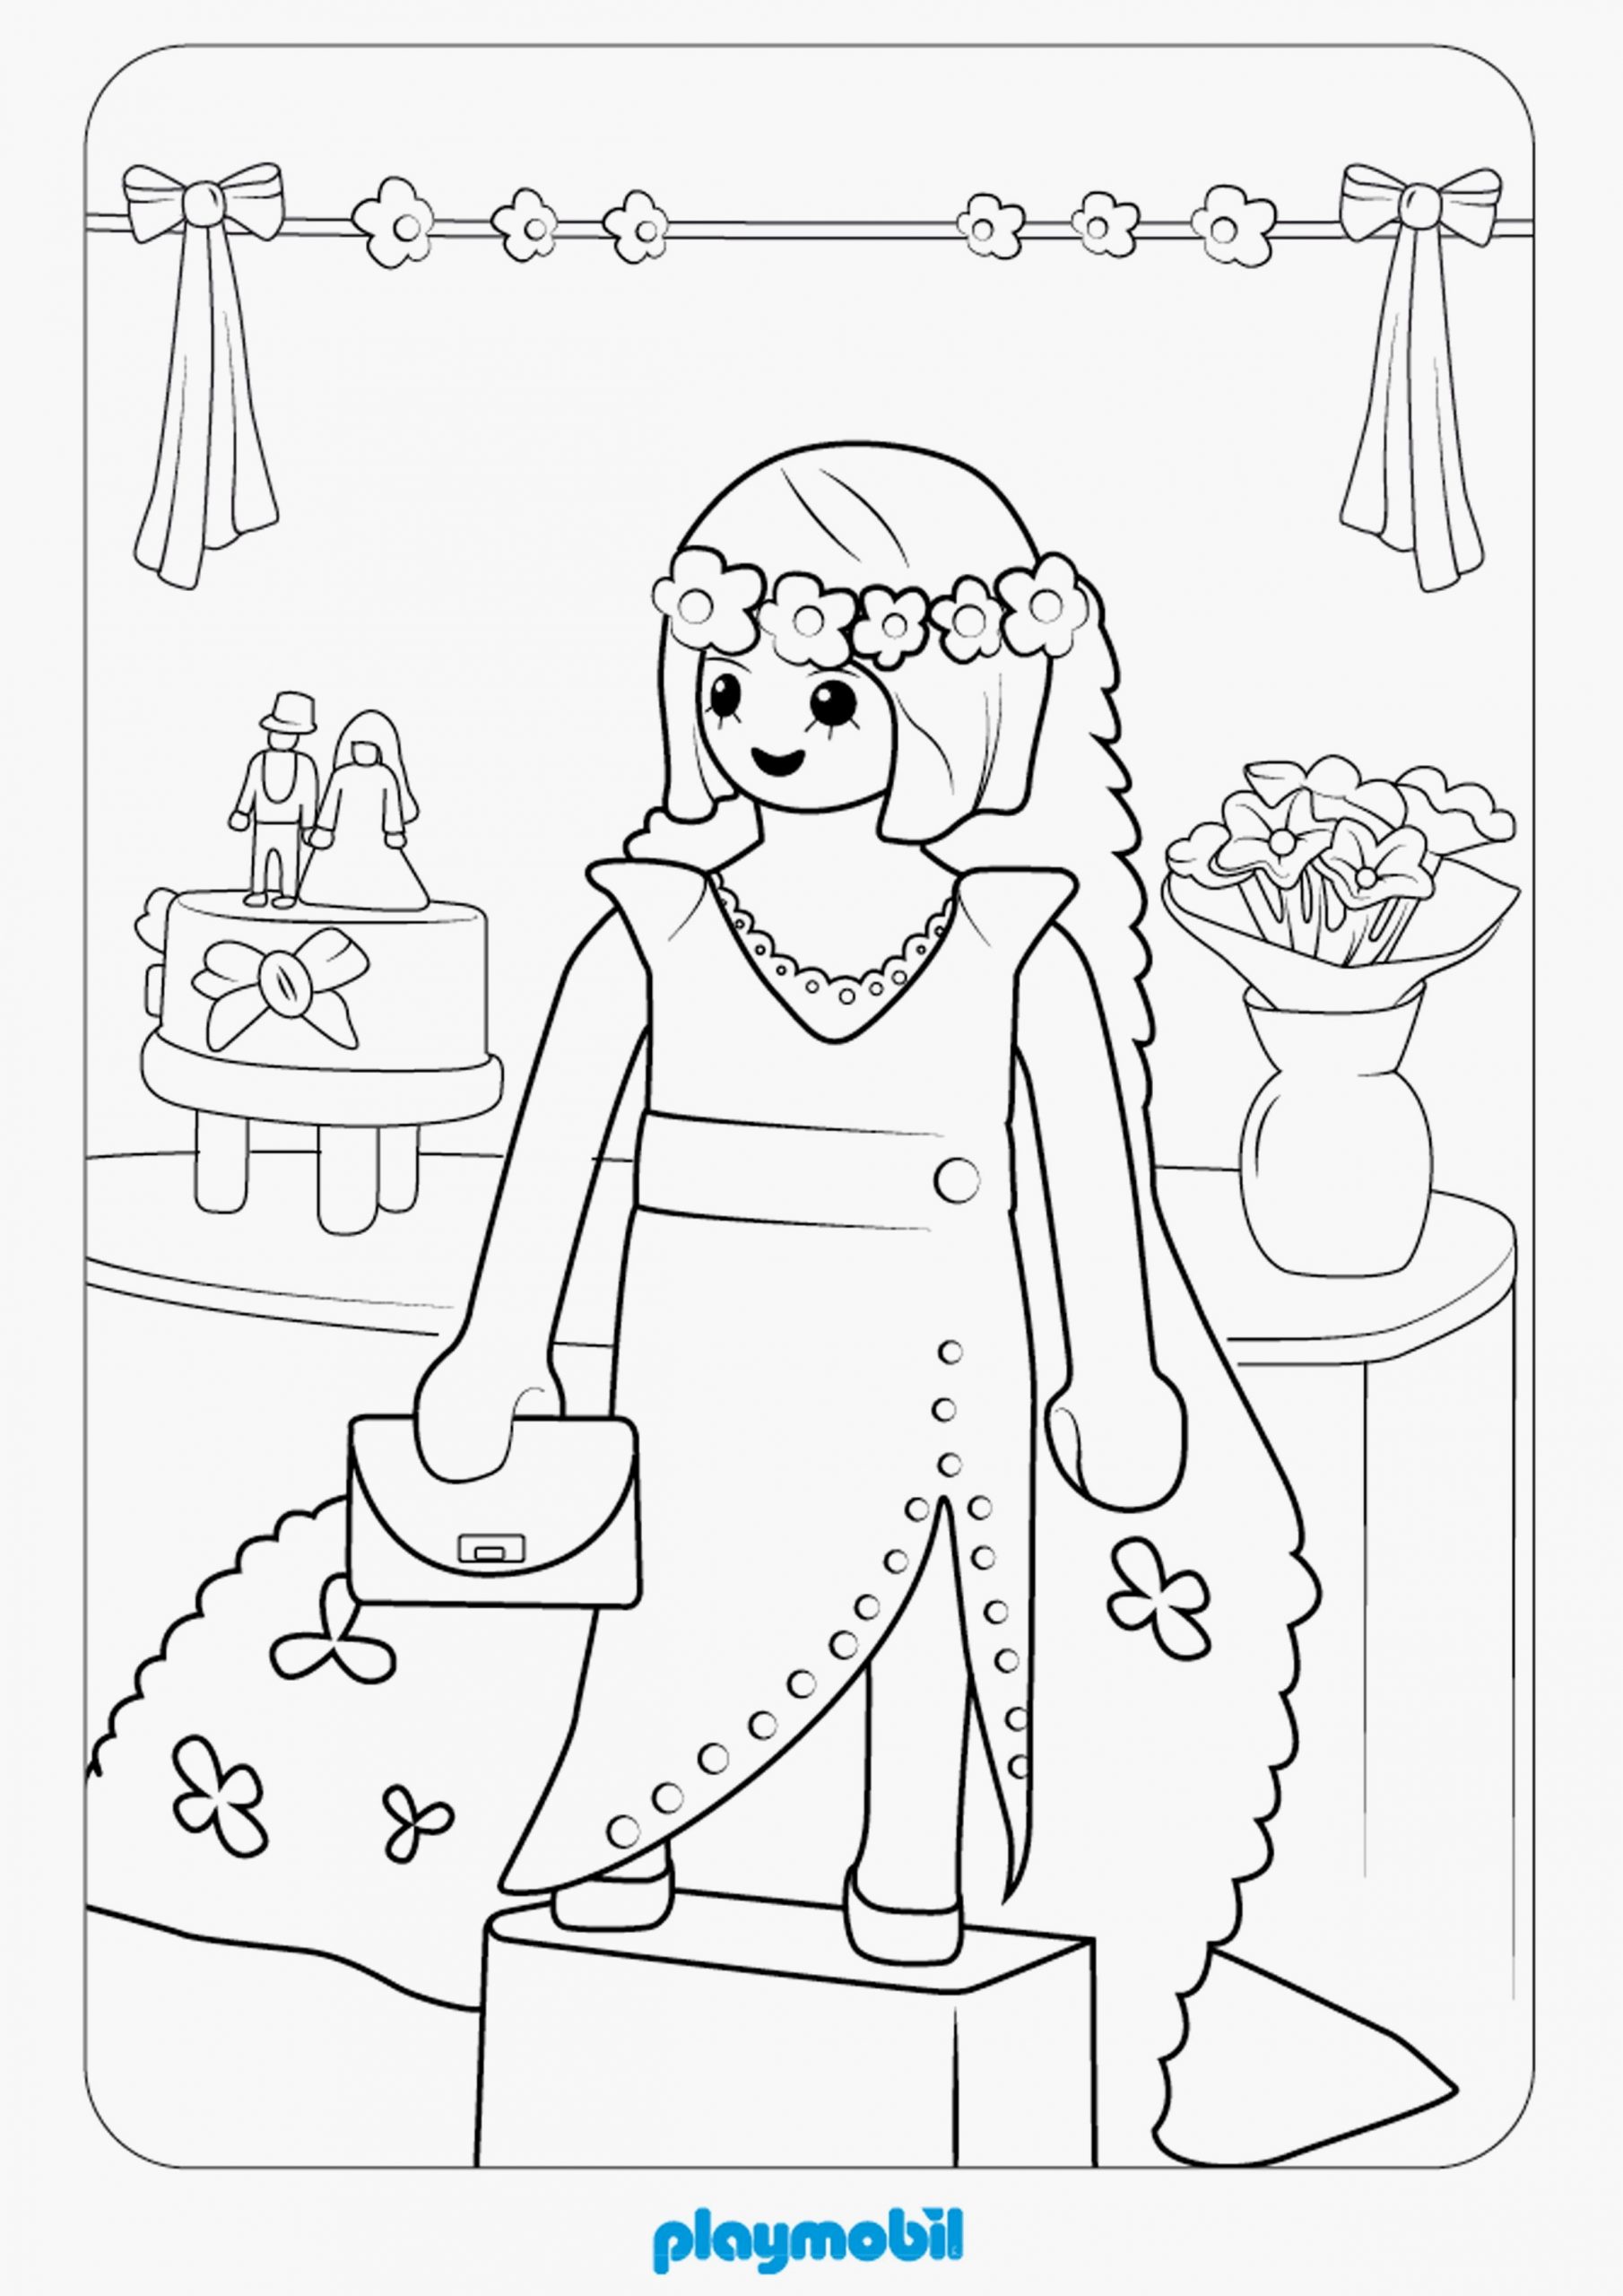 Coloriage Playmobil Dinosaure - Zagafrica.fr à Coloriages Fr 